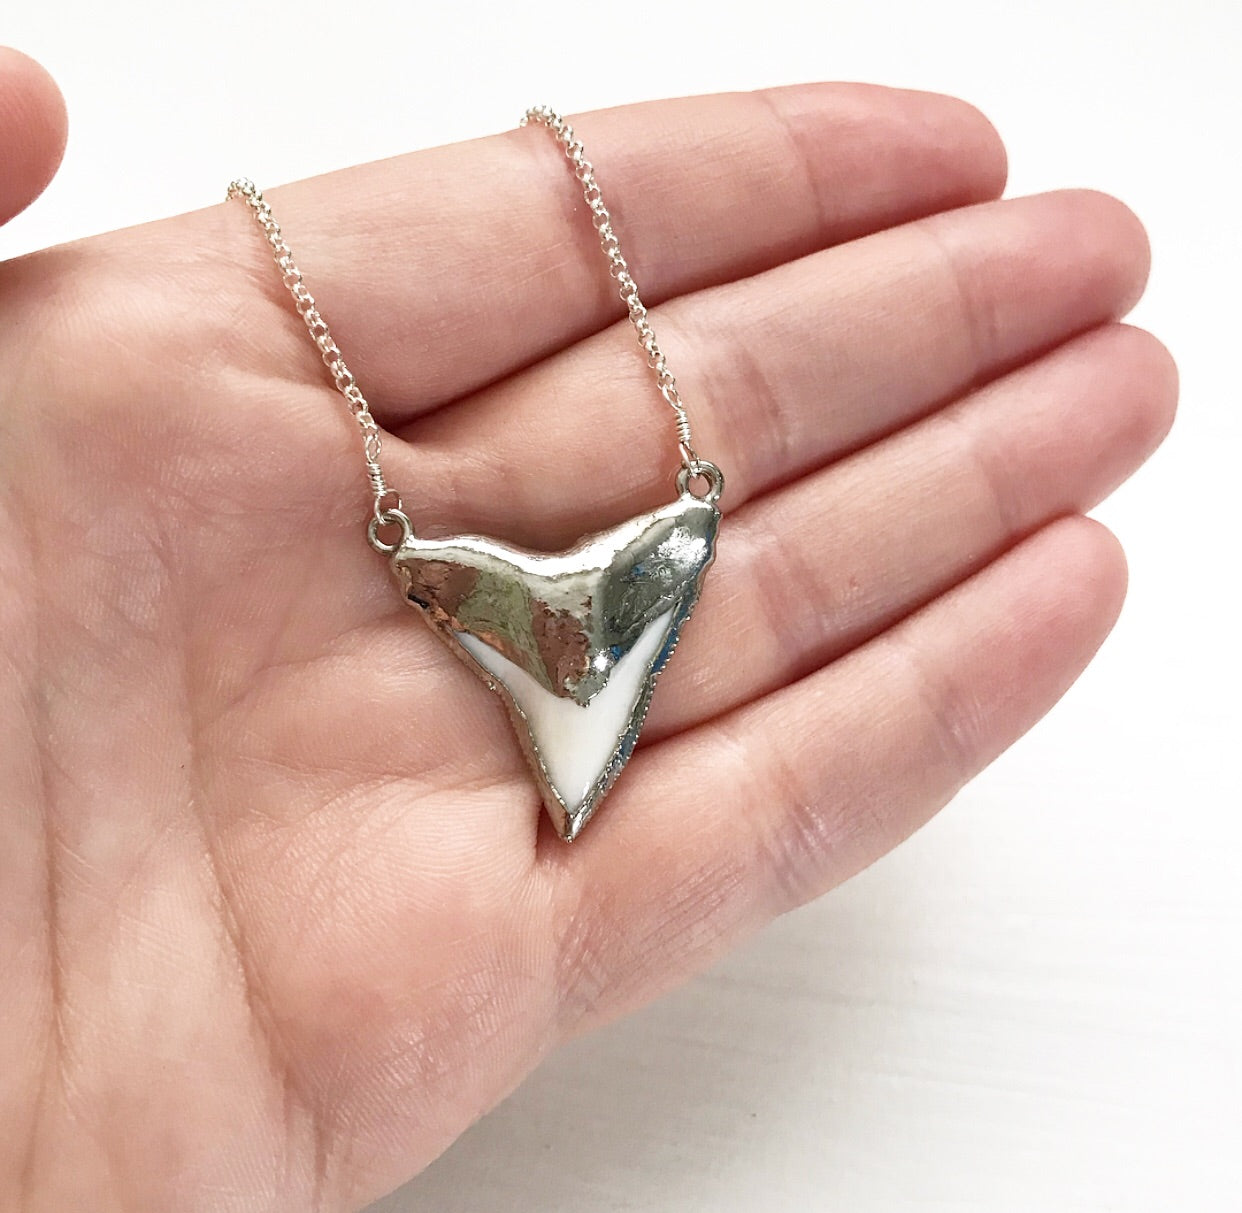 586-Shark Tooth Necklace